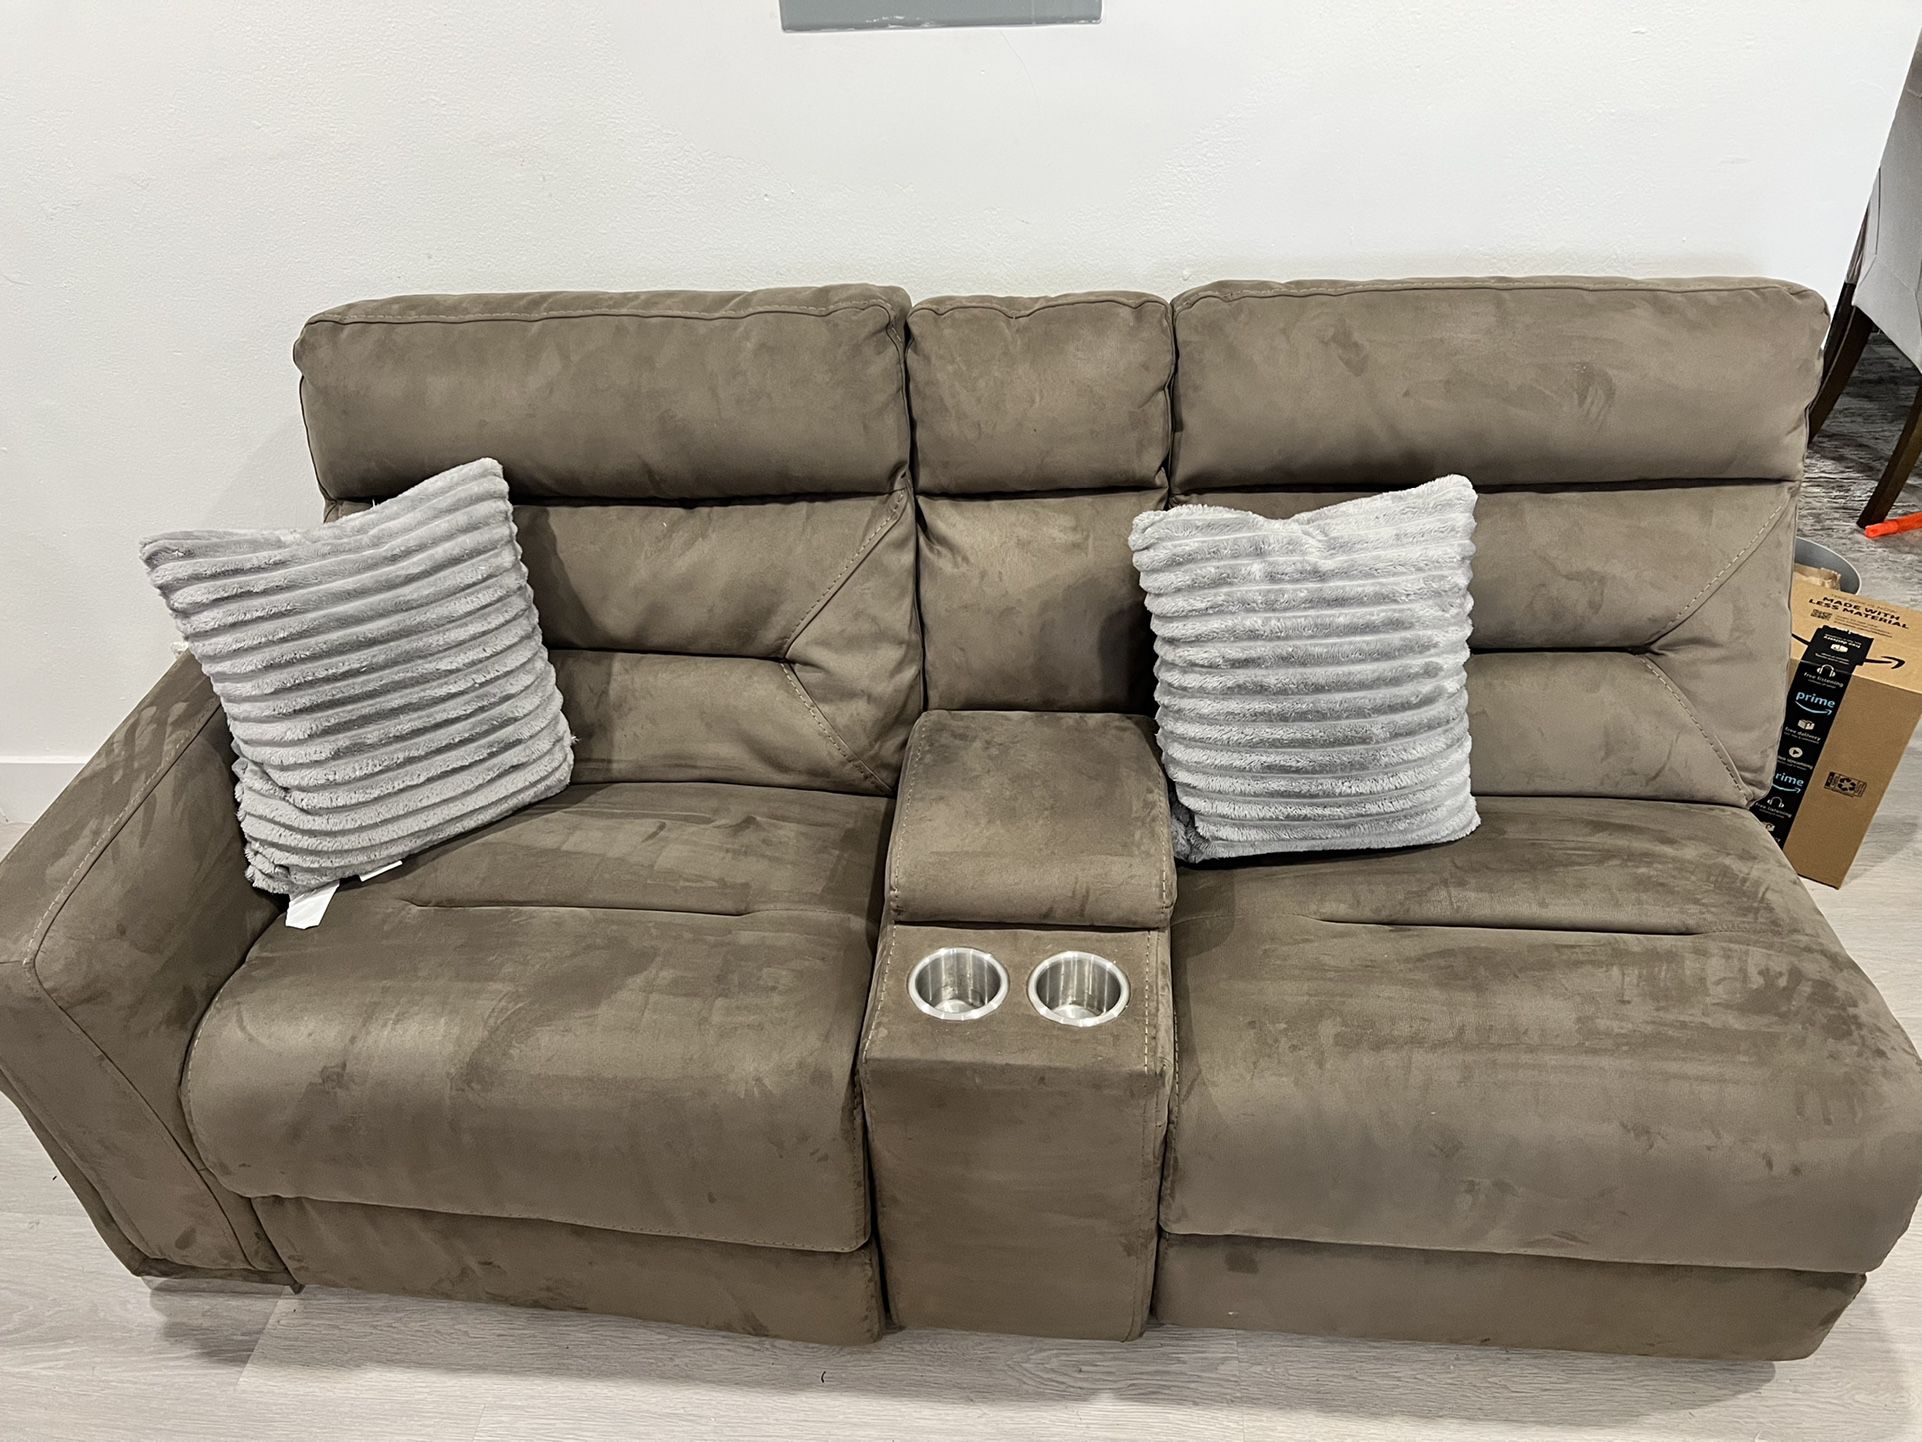 Two Mocha Color Reclining couches(Great Deal)